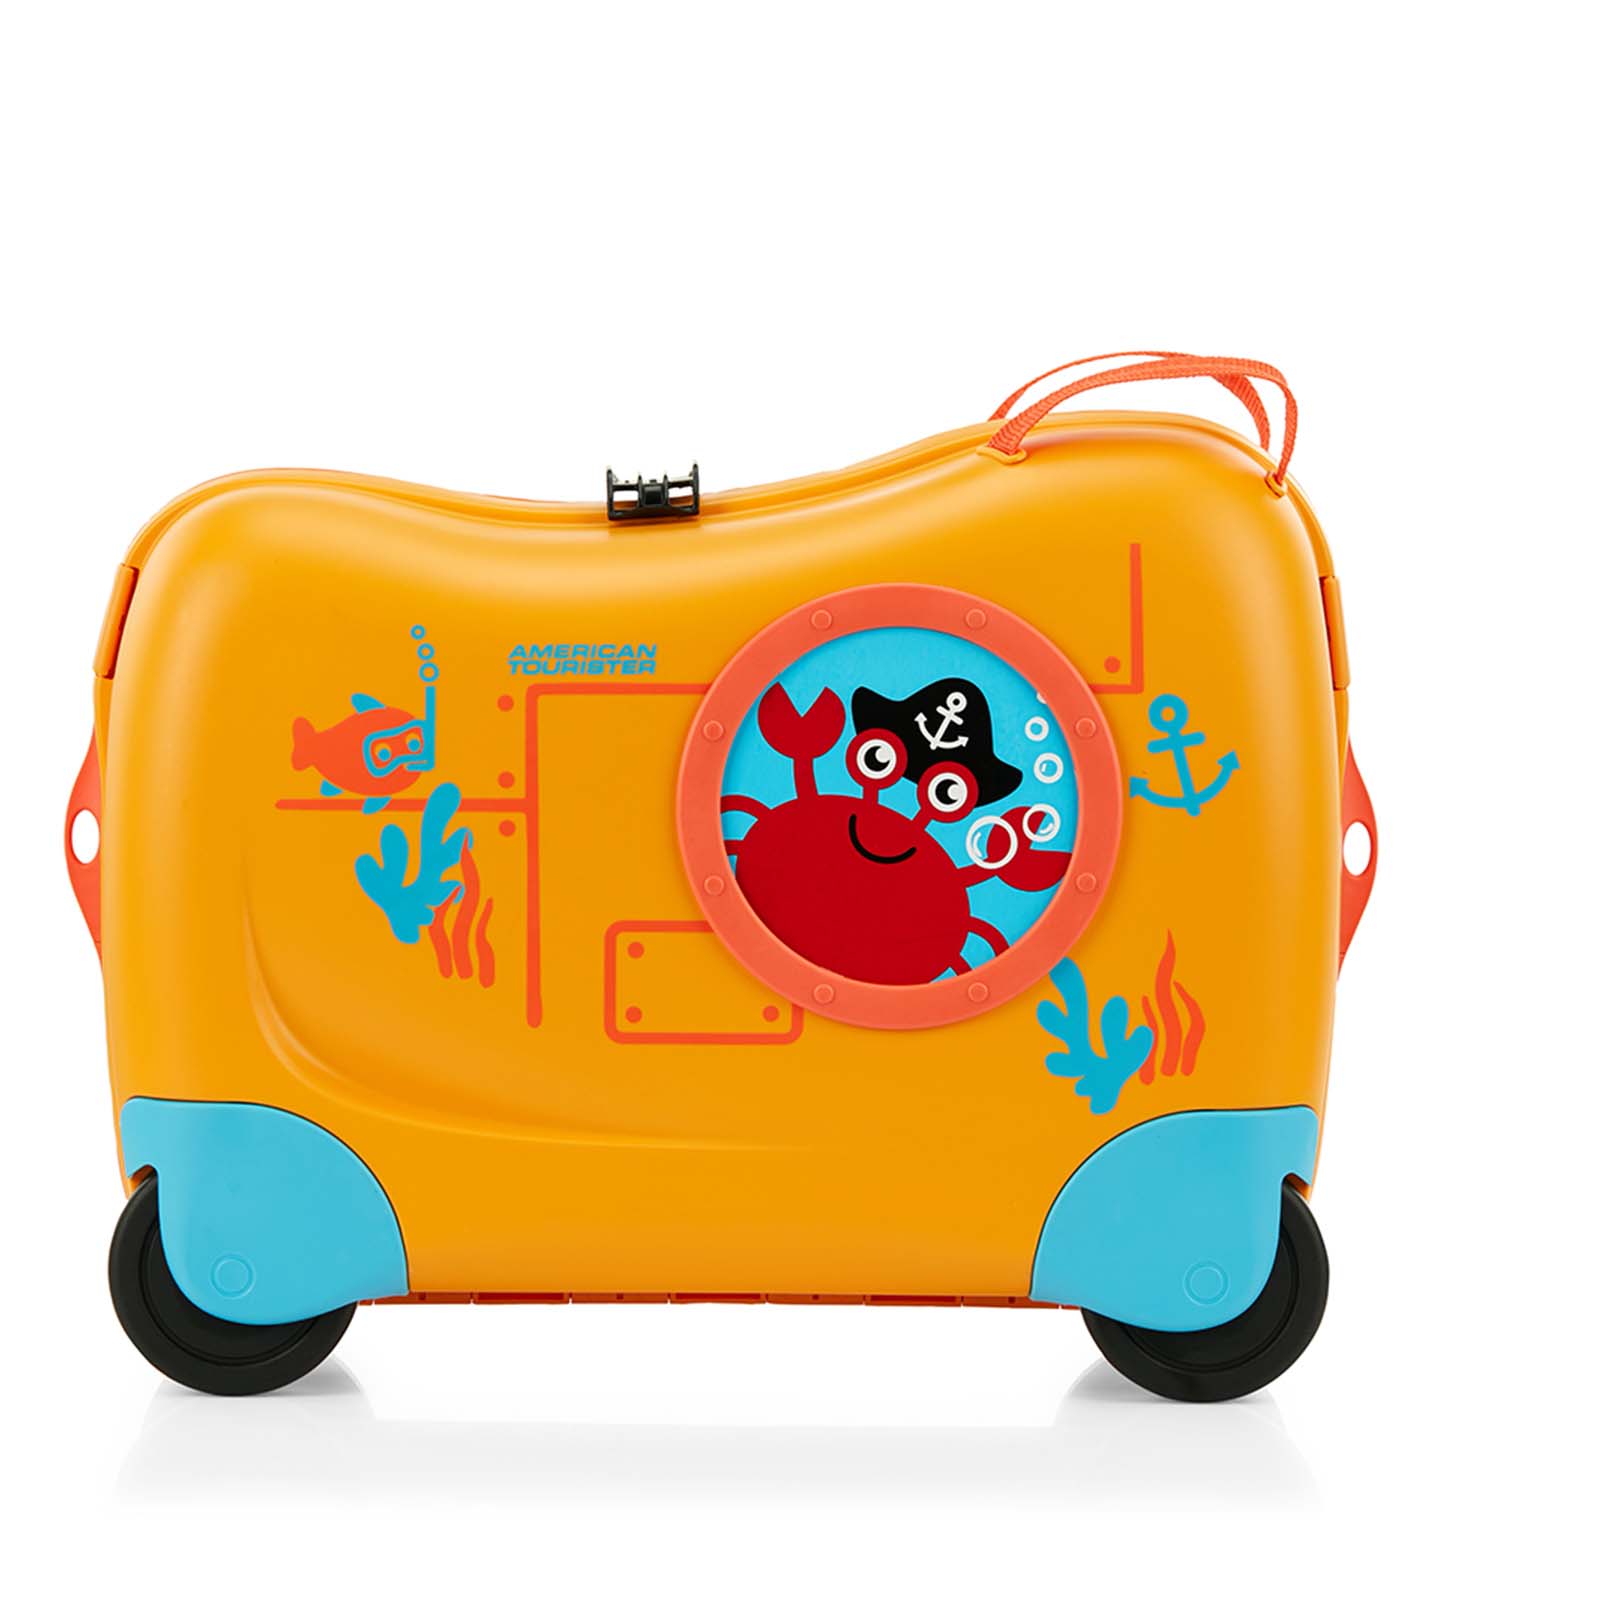 American Tourister Skittle NXT 50cm Ride-On Suitcase Yellow Submarine